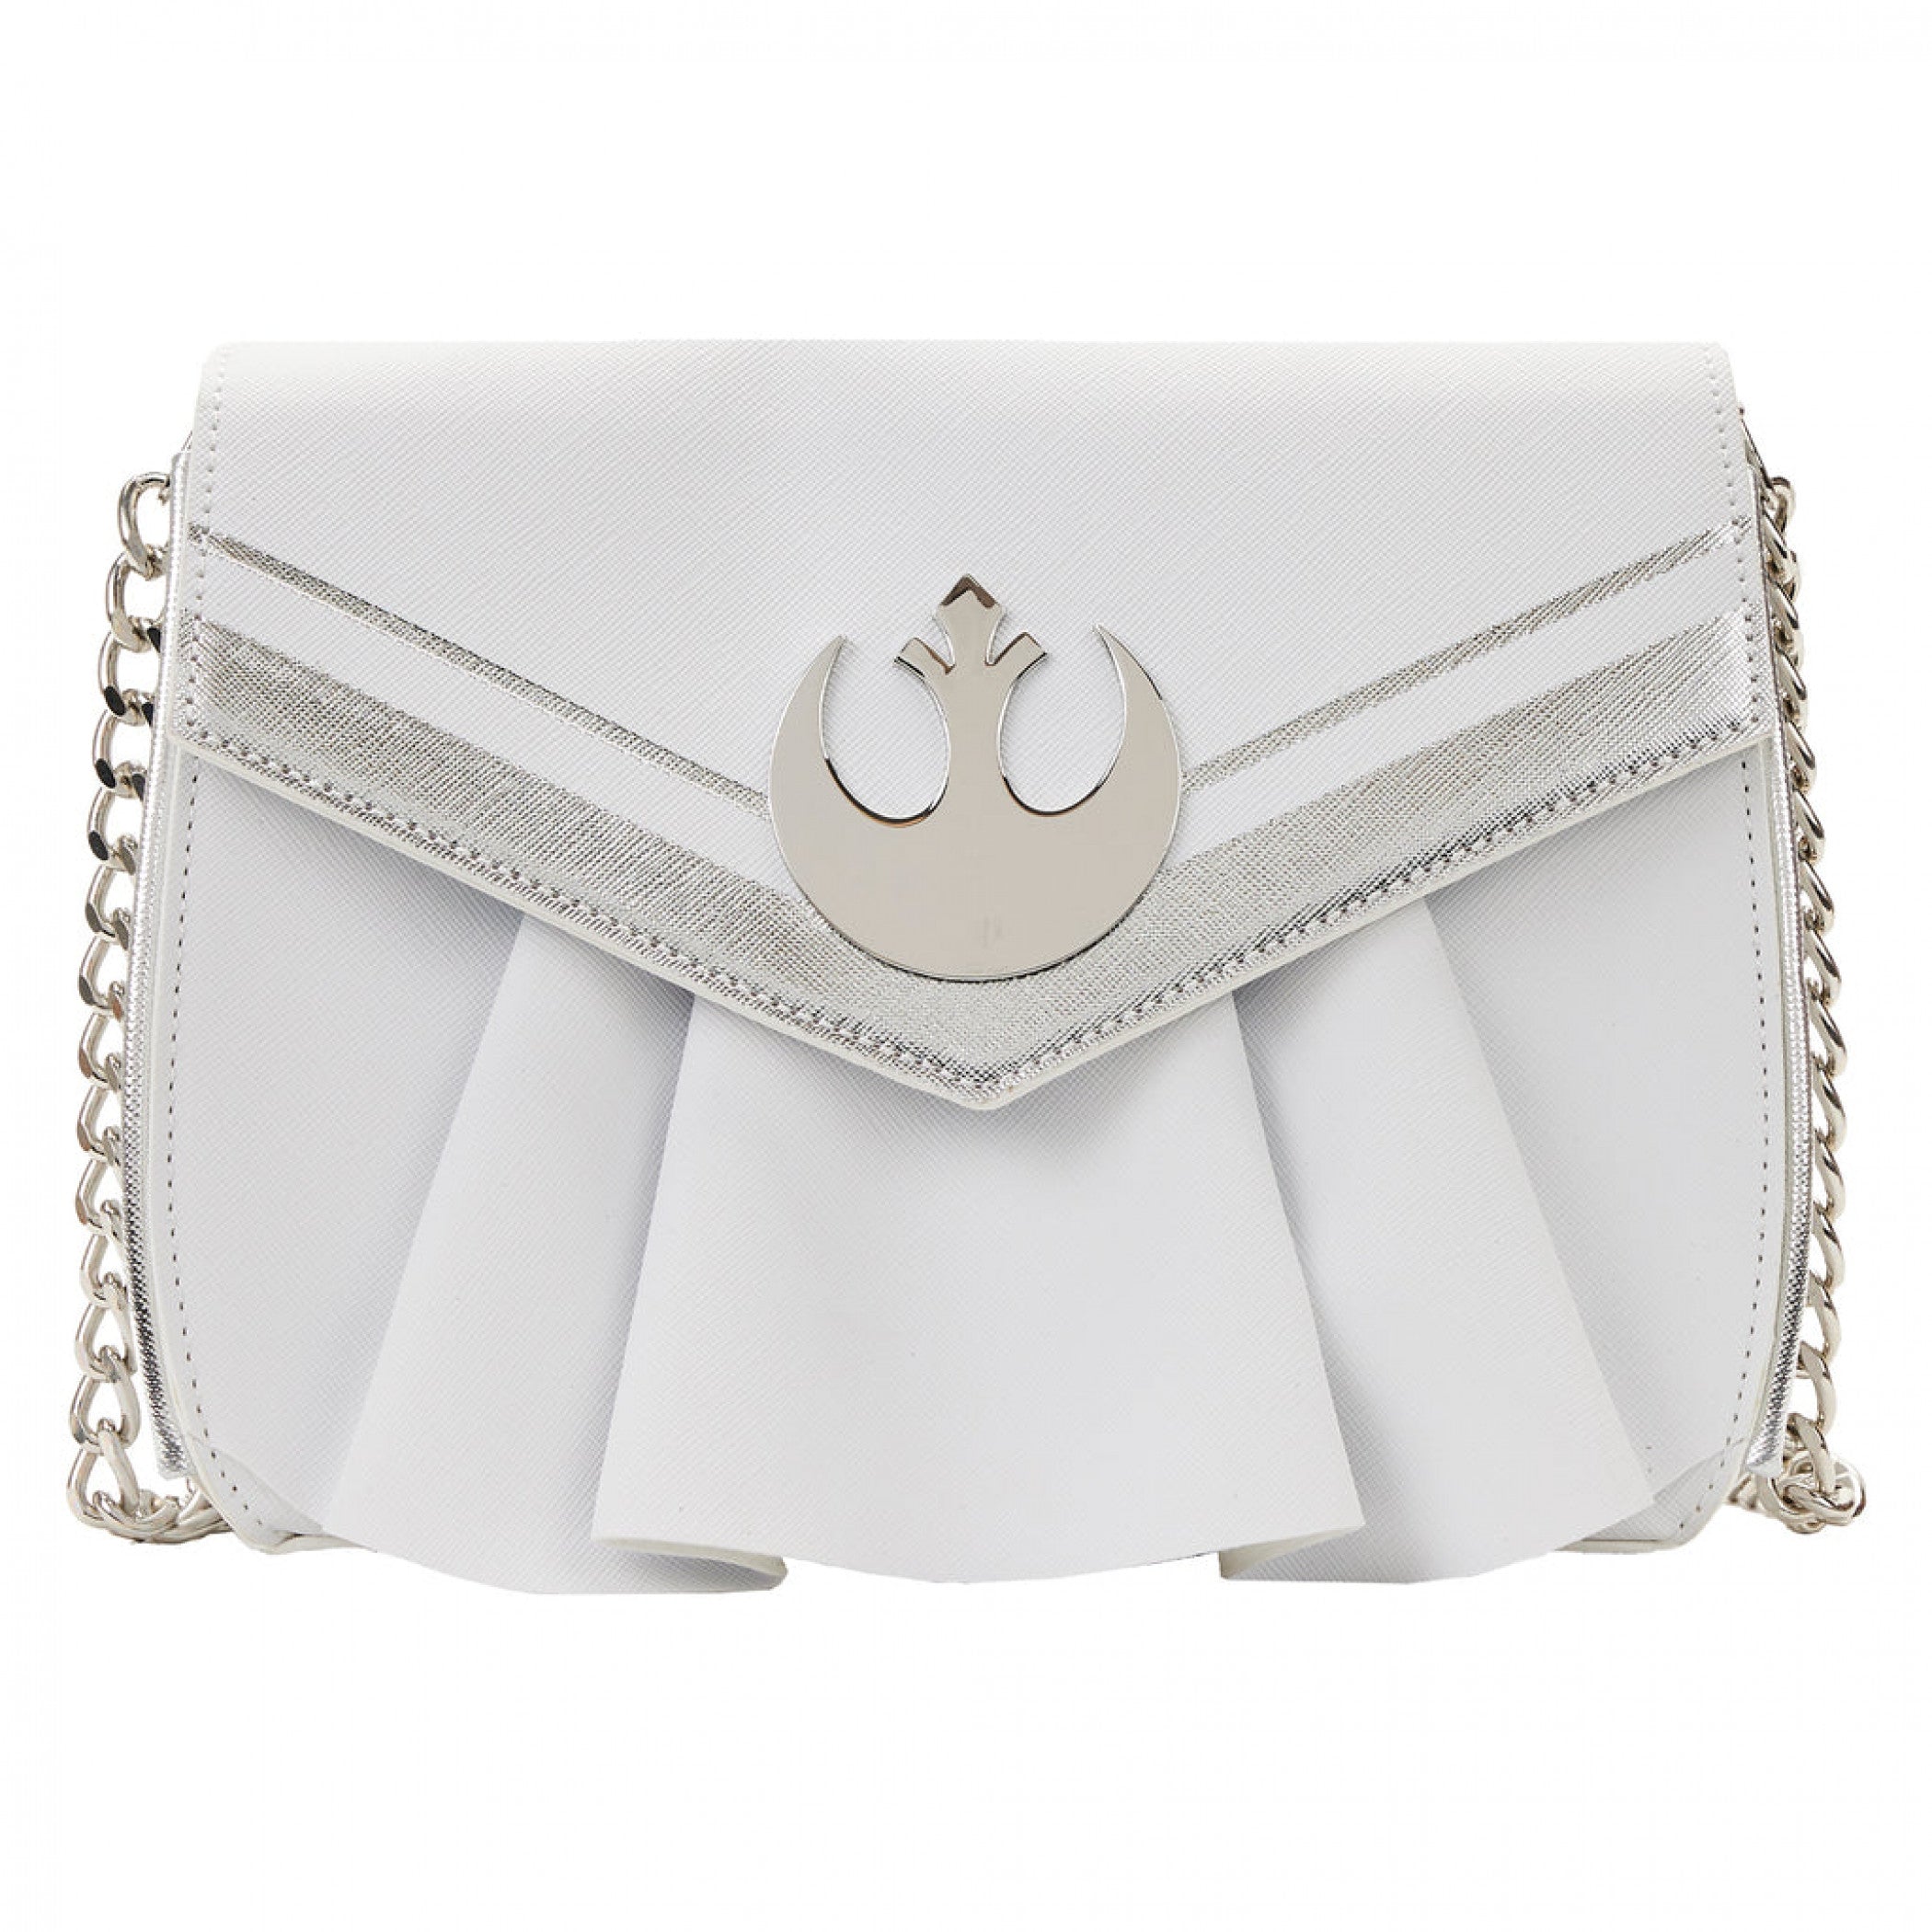 title:Star Wars Princess Leia Cosplay Chain Strap Crossbody Bag by Loungefly;color:White